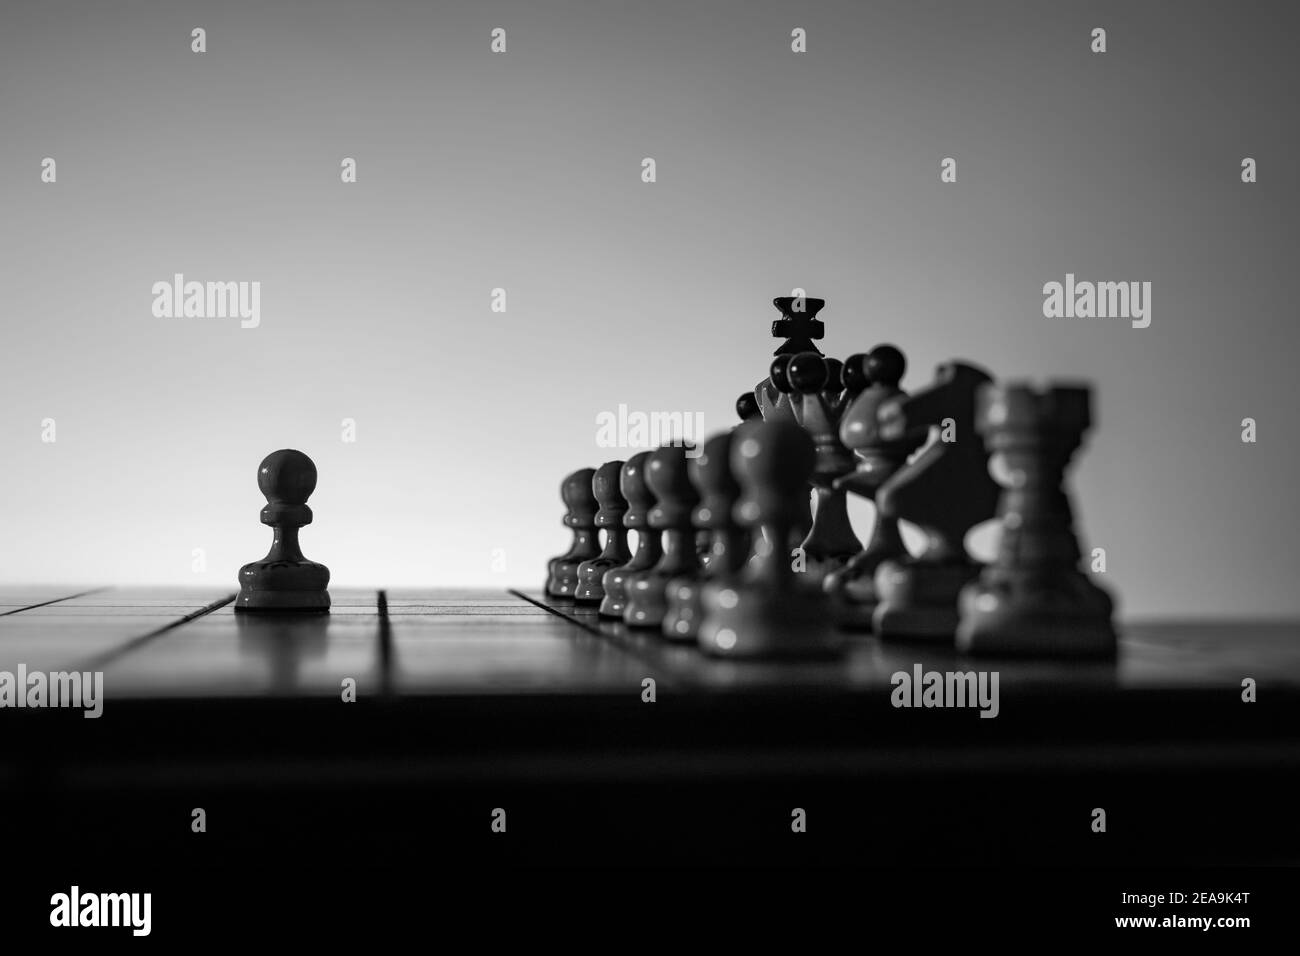 Game of chess. Board with chess pieces silhouettes on white background. Concept of business ideas and competition and strategy ideas. Black and White Stock Photo